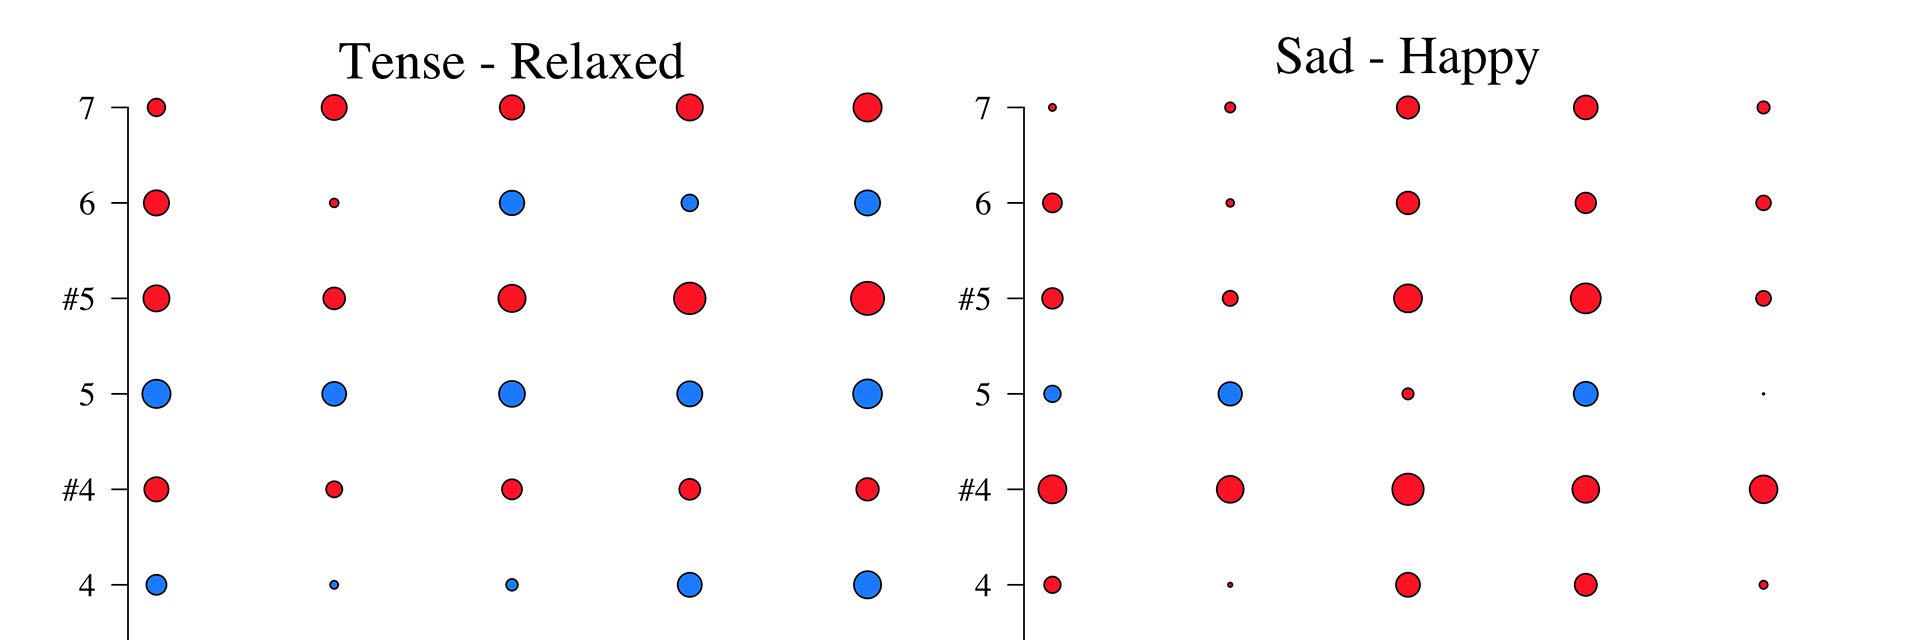 A chart of red and blue dots of various sizes representing notes and moods.